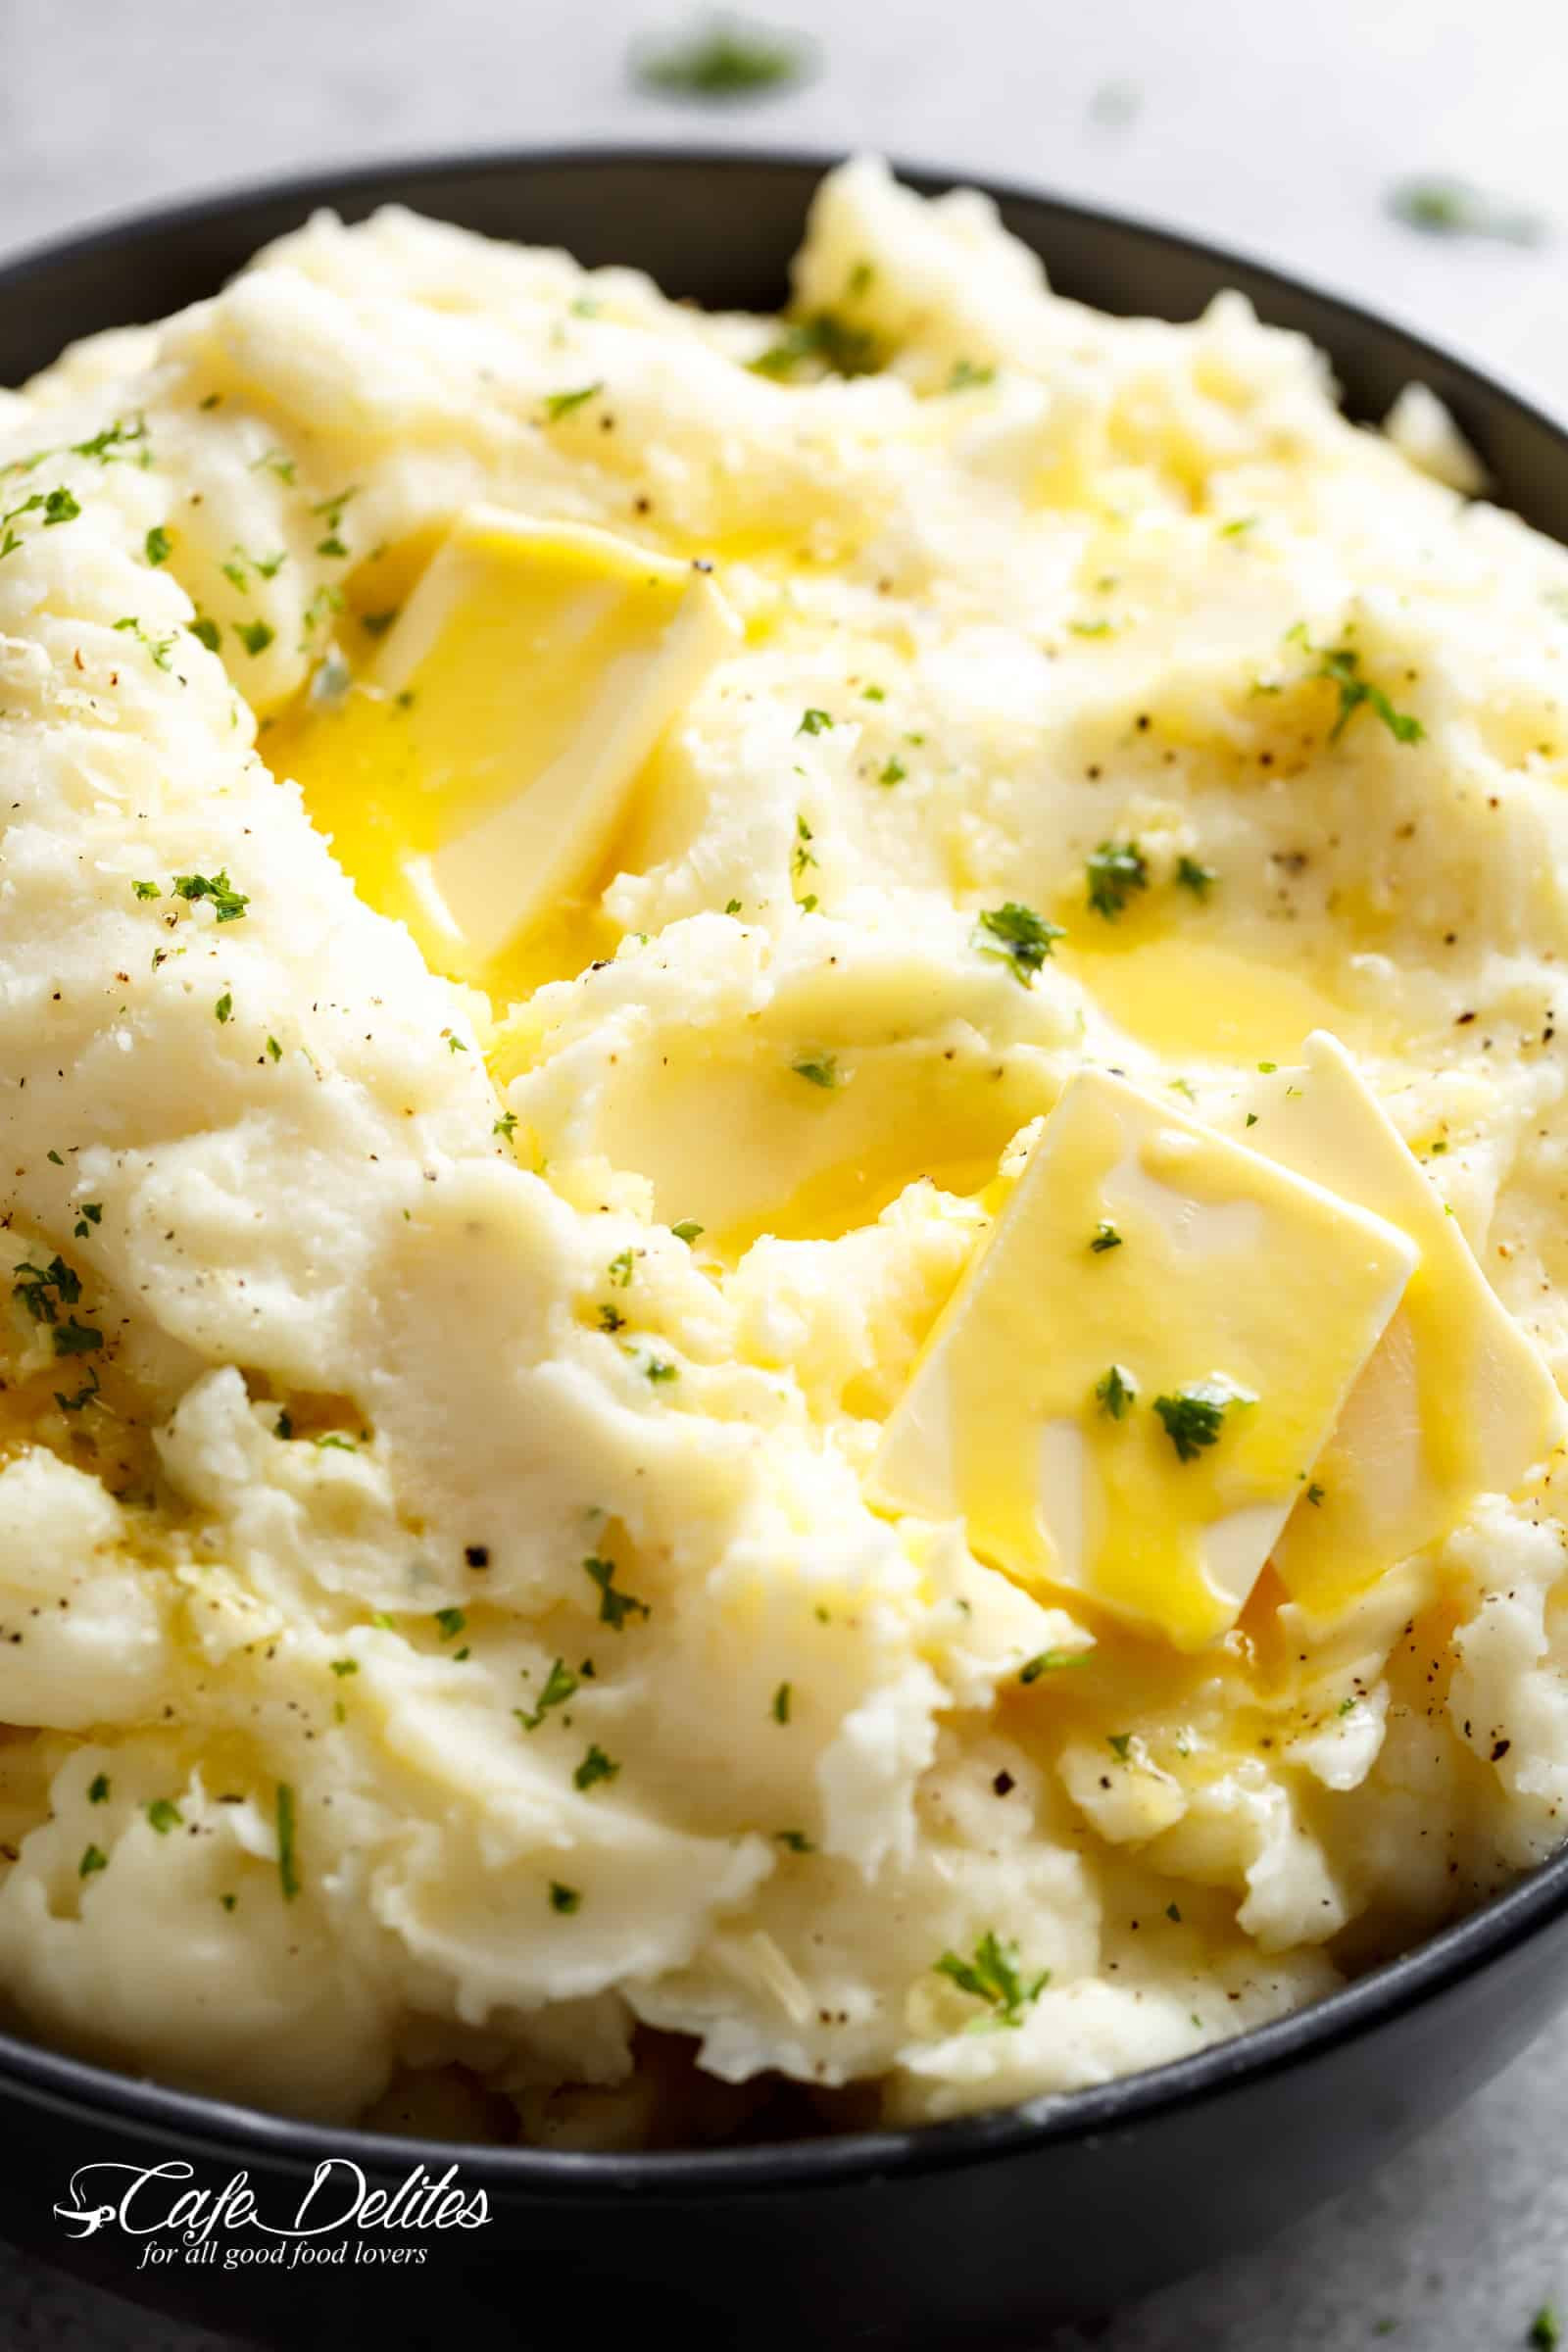 Recipe For Mashed Potatoes
 Easy Creamy Mashed Potatoes Recipe Cafe Delites